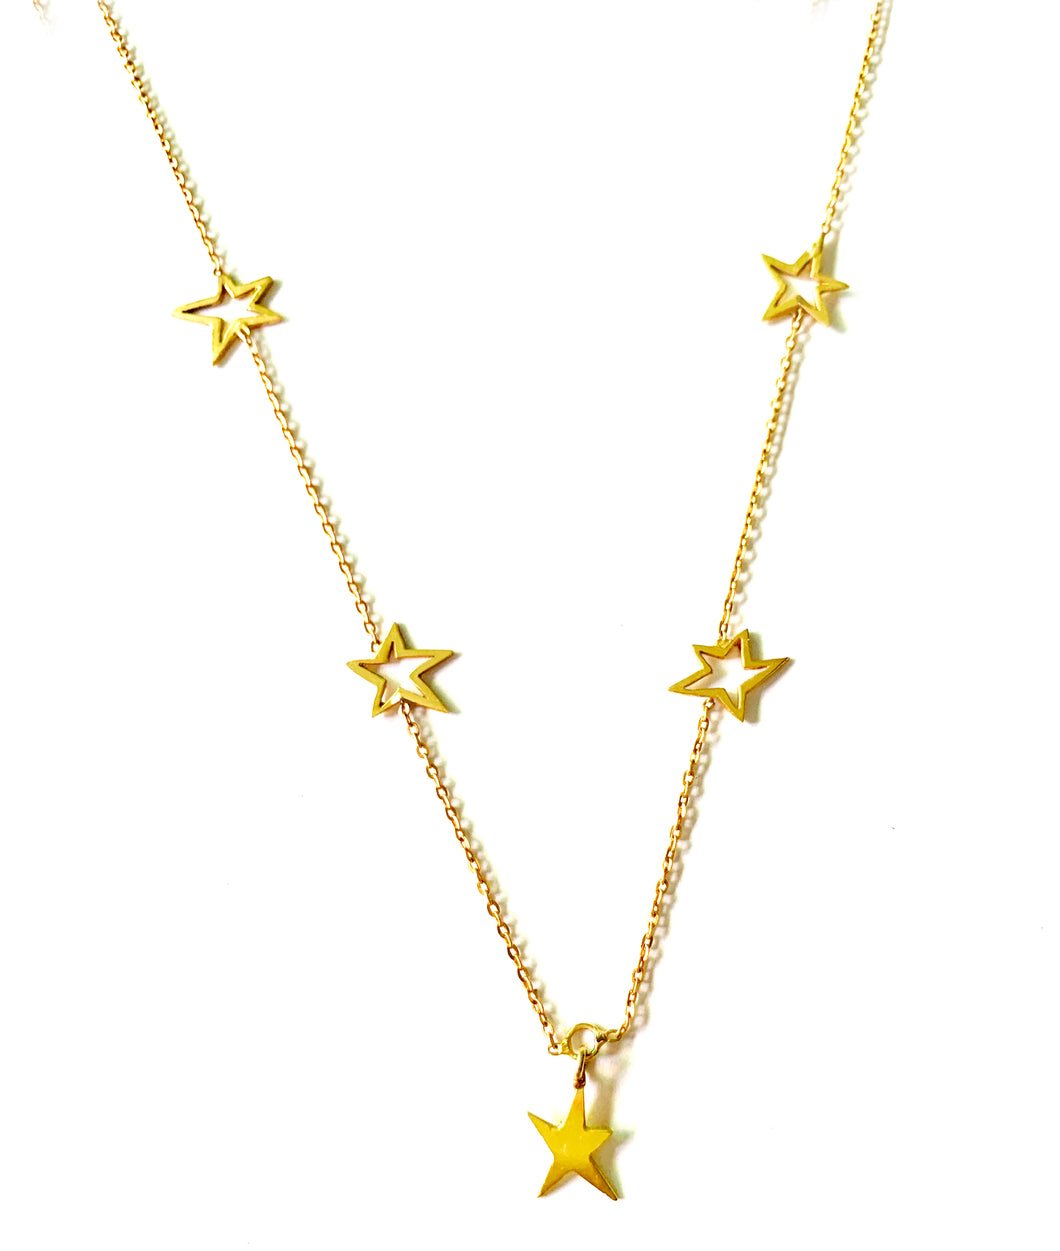 Dancing stars gold necklace